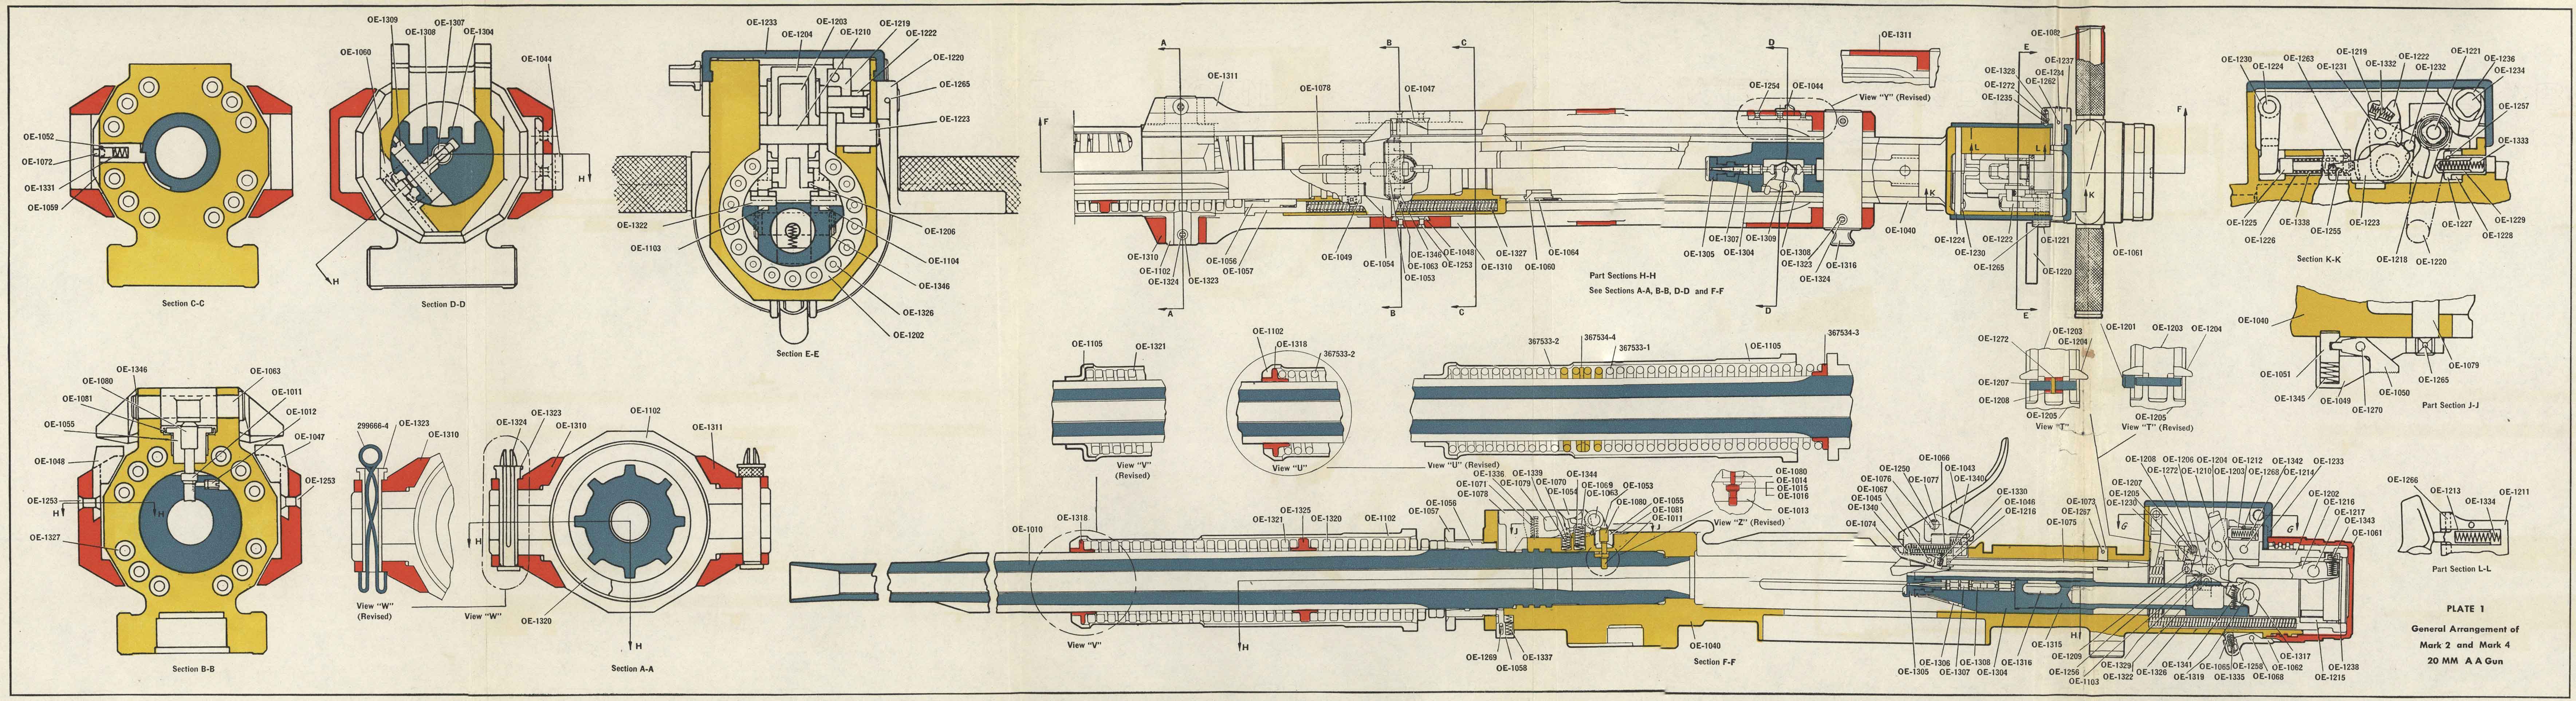 
Plate 1
General Arrangement
Mark 2 and Mark 4
20 MM AA Gun
Between page 160 and 161